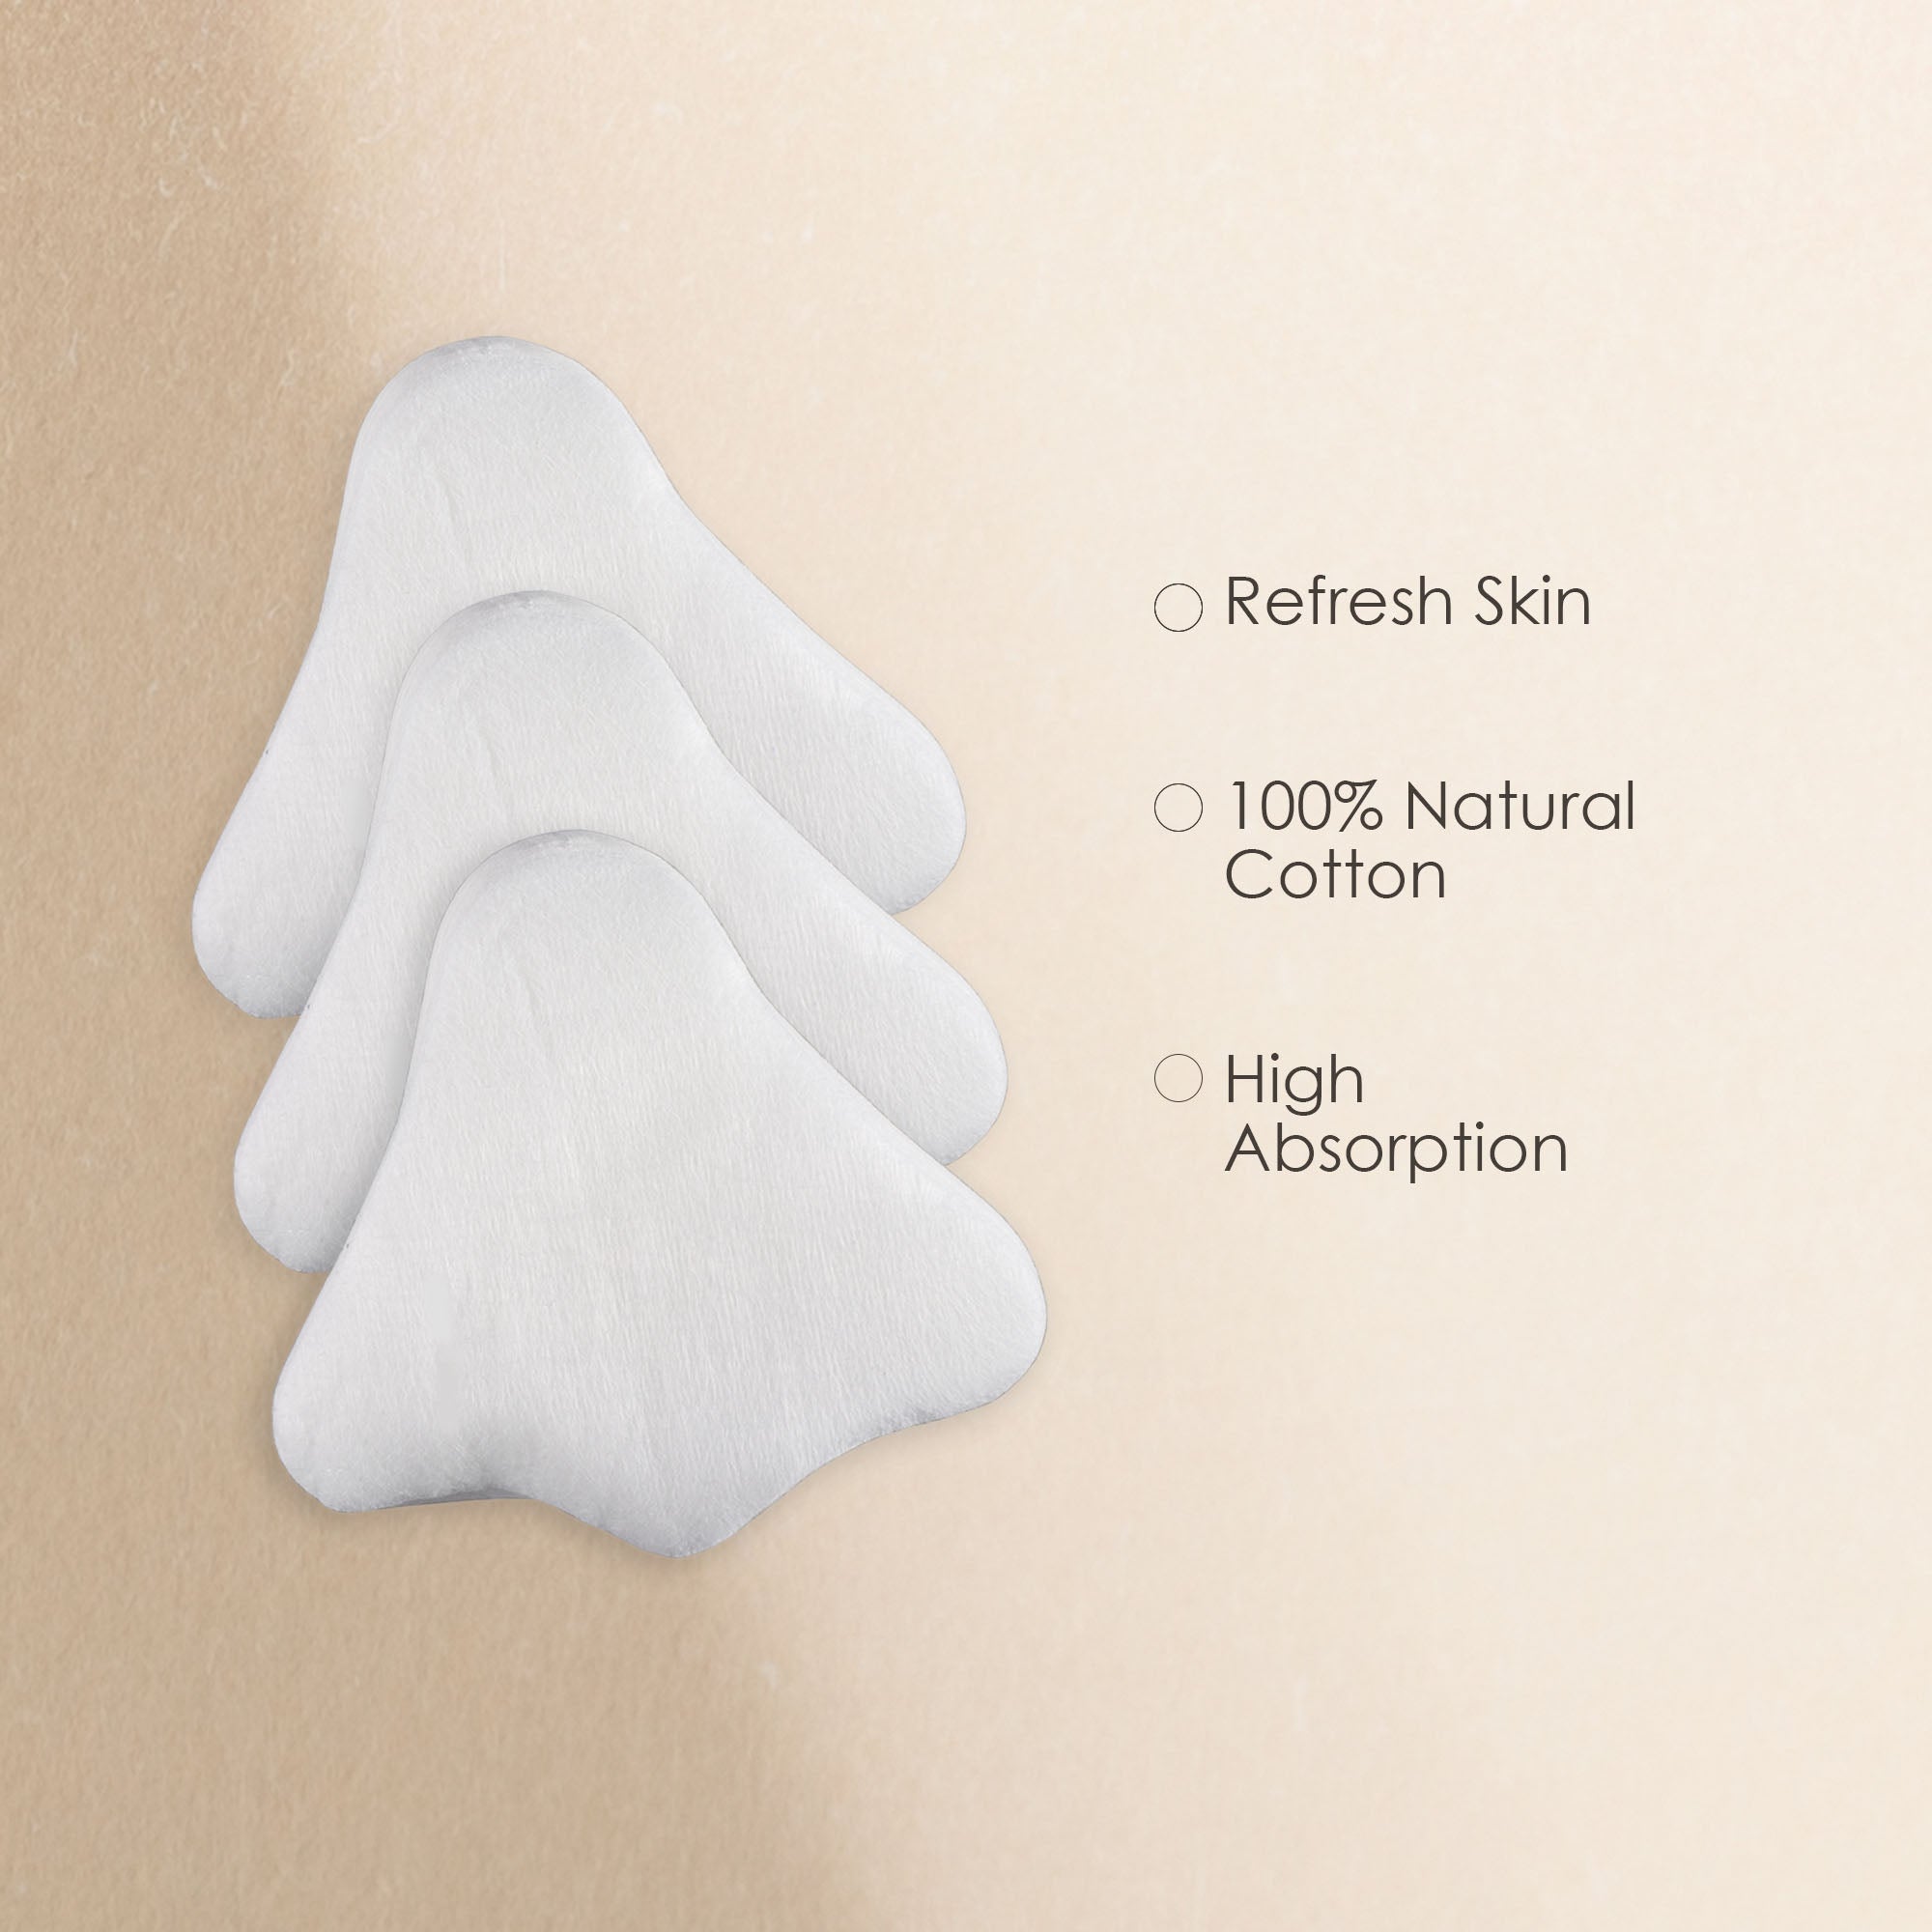 100pcs Disposable Nose Masks | Non-woven Cotton Pads | For Skincare and Spa use - Project E Beauty